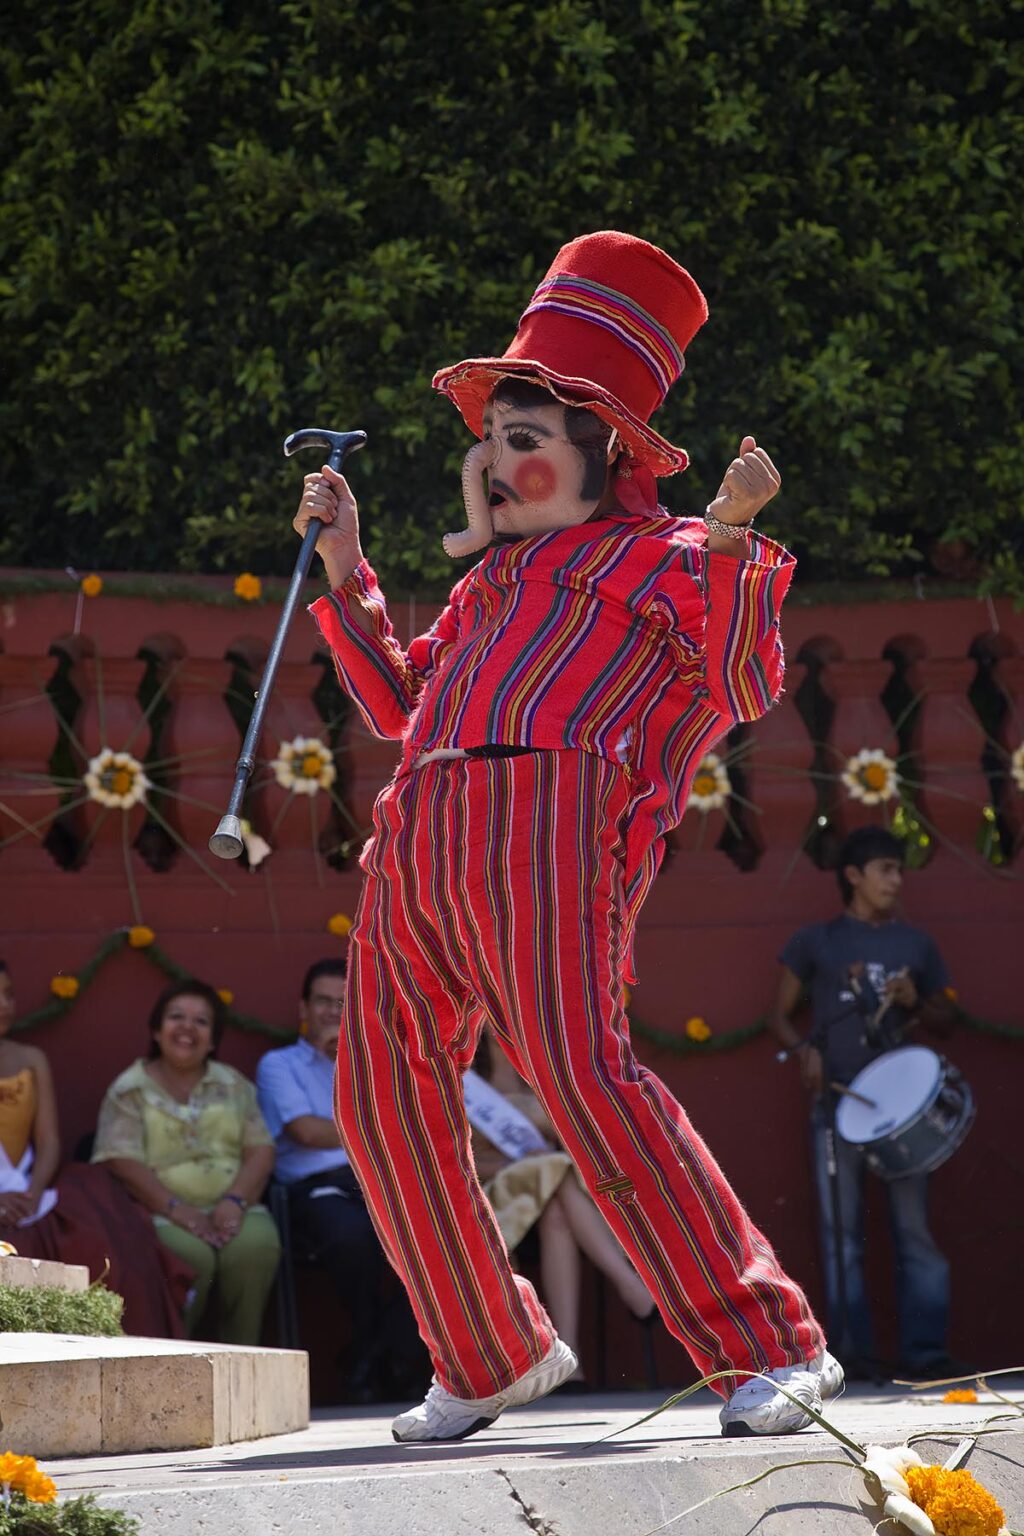 This dance troupe jokes with the crowd in the annual INDEPENDENCE DAY PARADE in September - SAN MIGUEL DE ALLENDE, MEXICO